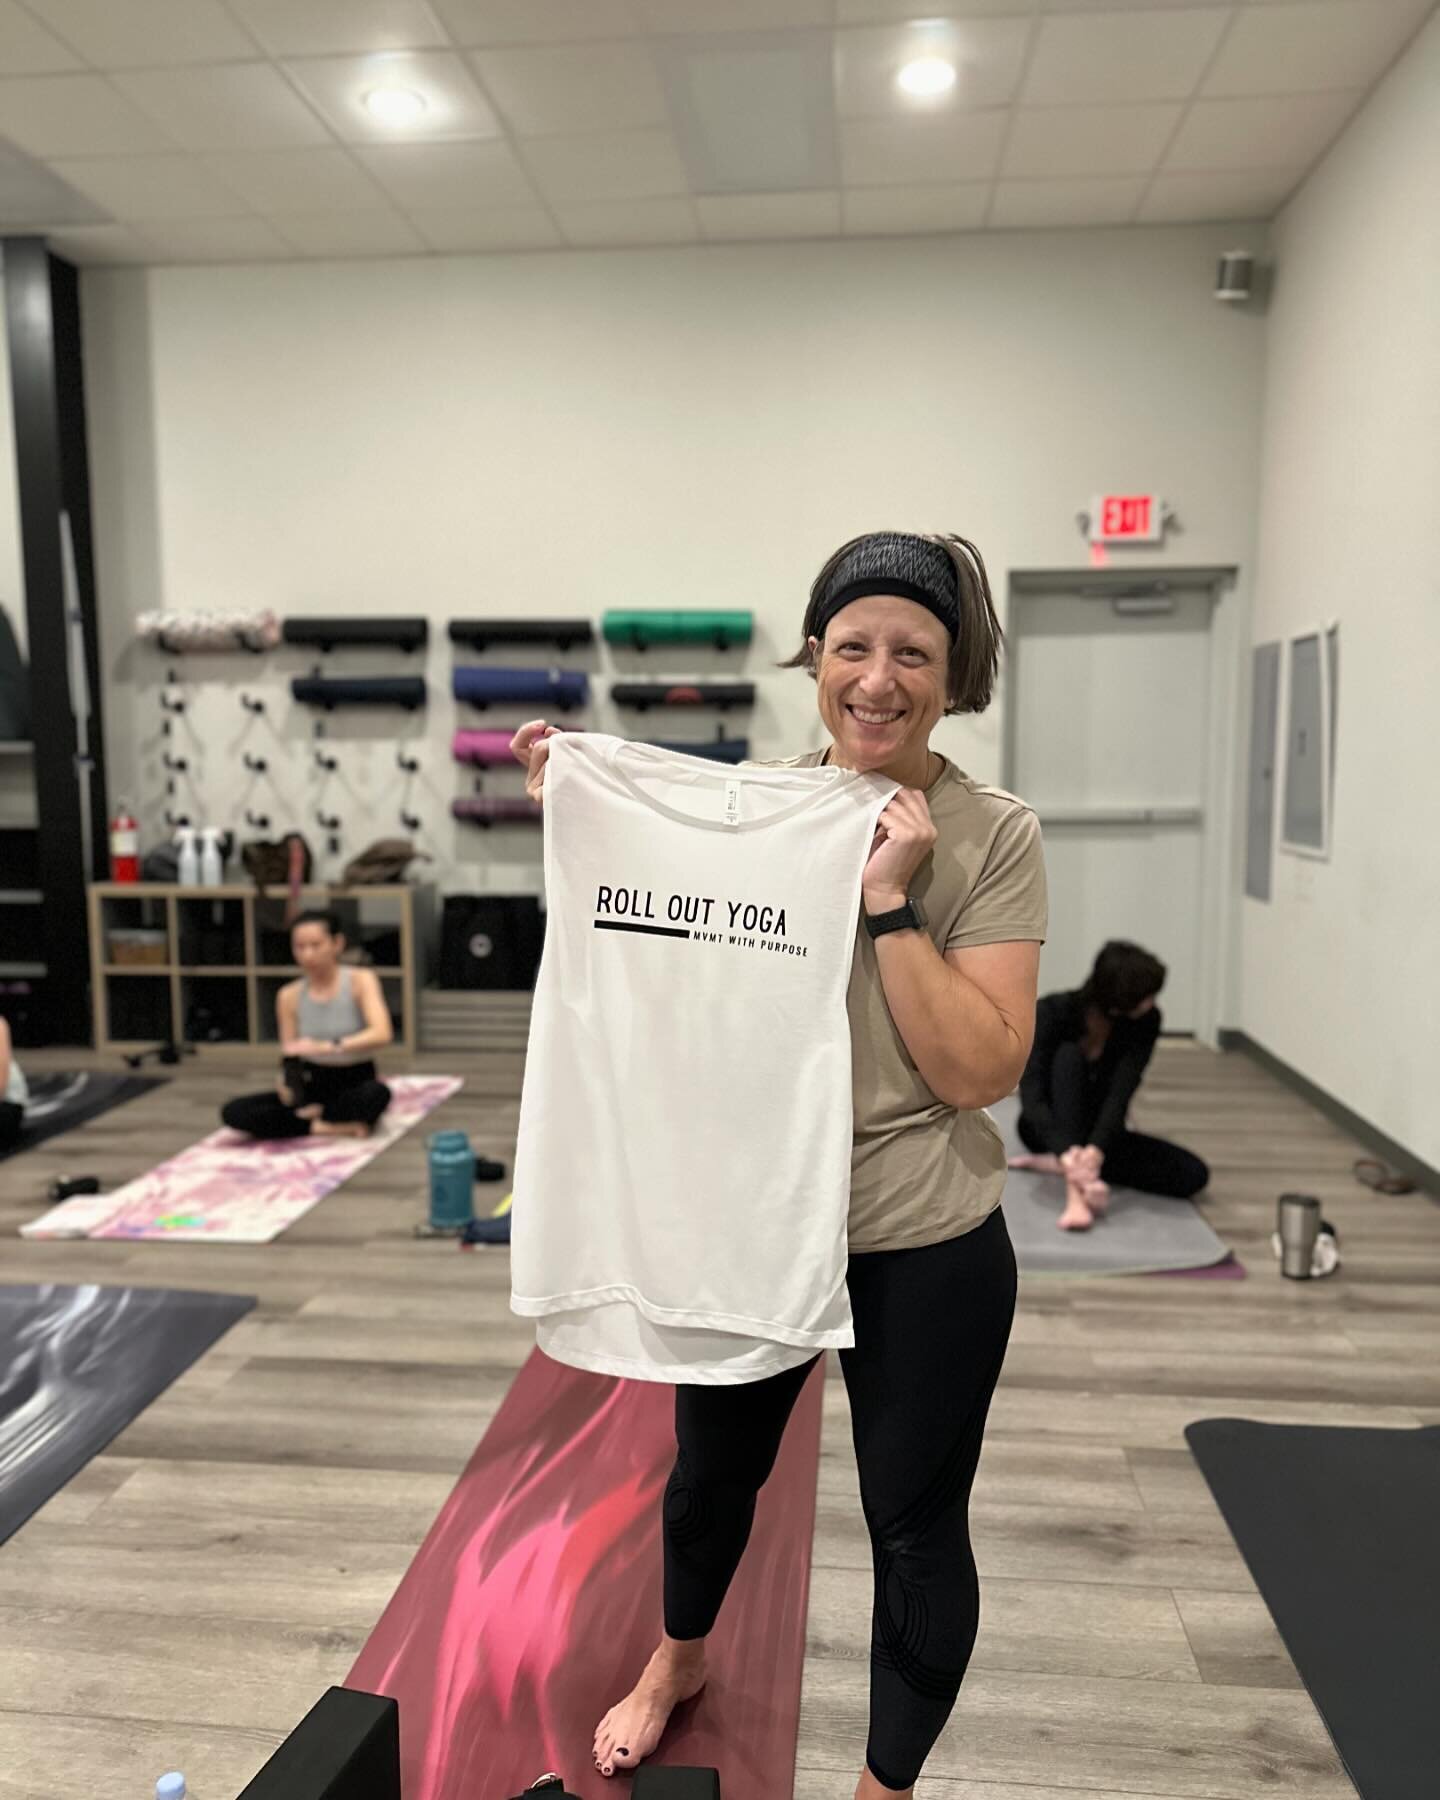 We want to take a moment to recognize Tracey, who&rsquo;s been so consistent with her yoga practice since she set a wellness goal for herself last Fall.  Great job!!!